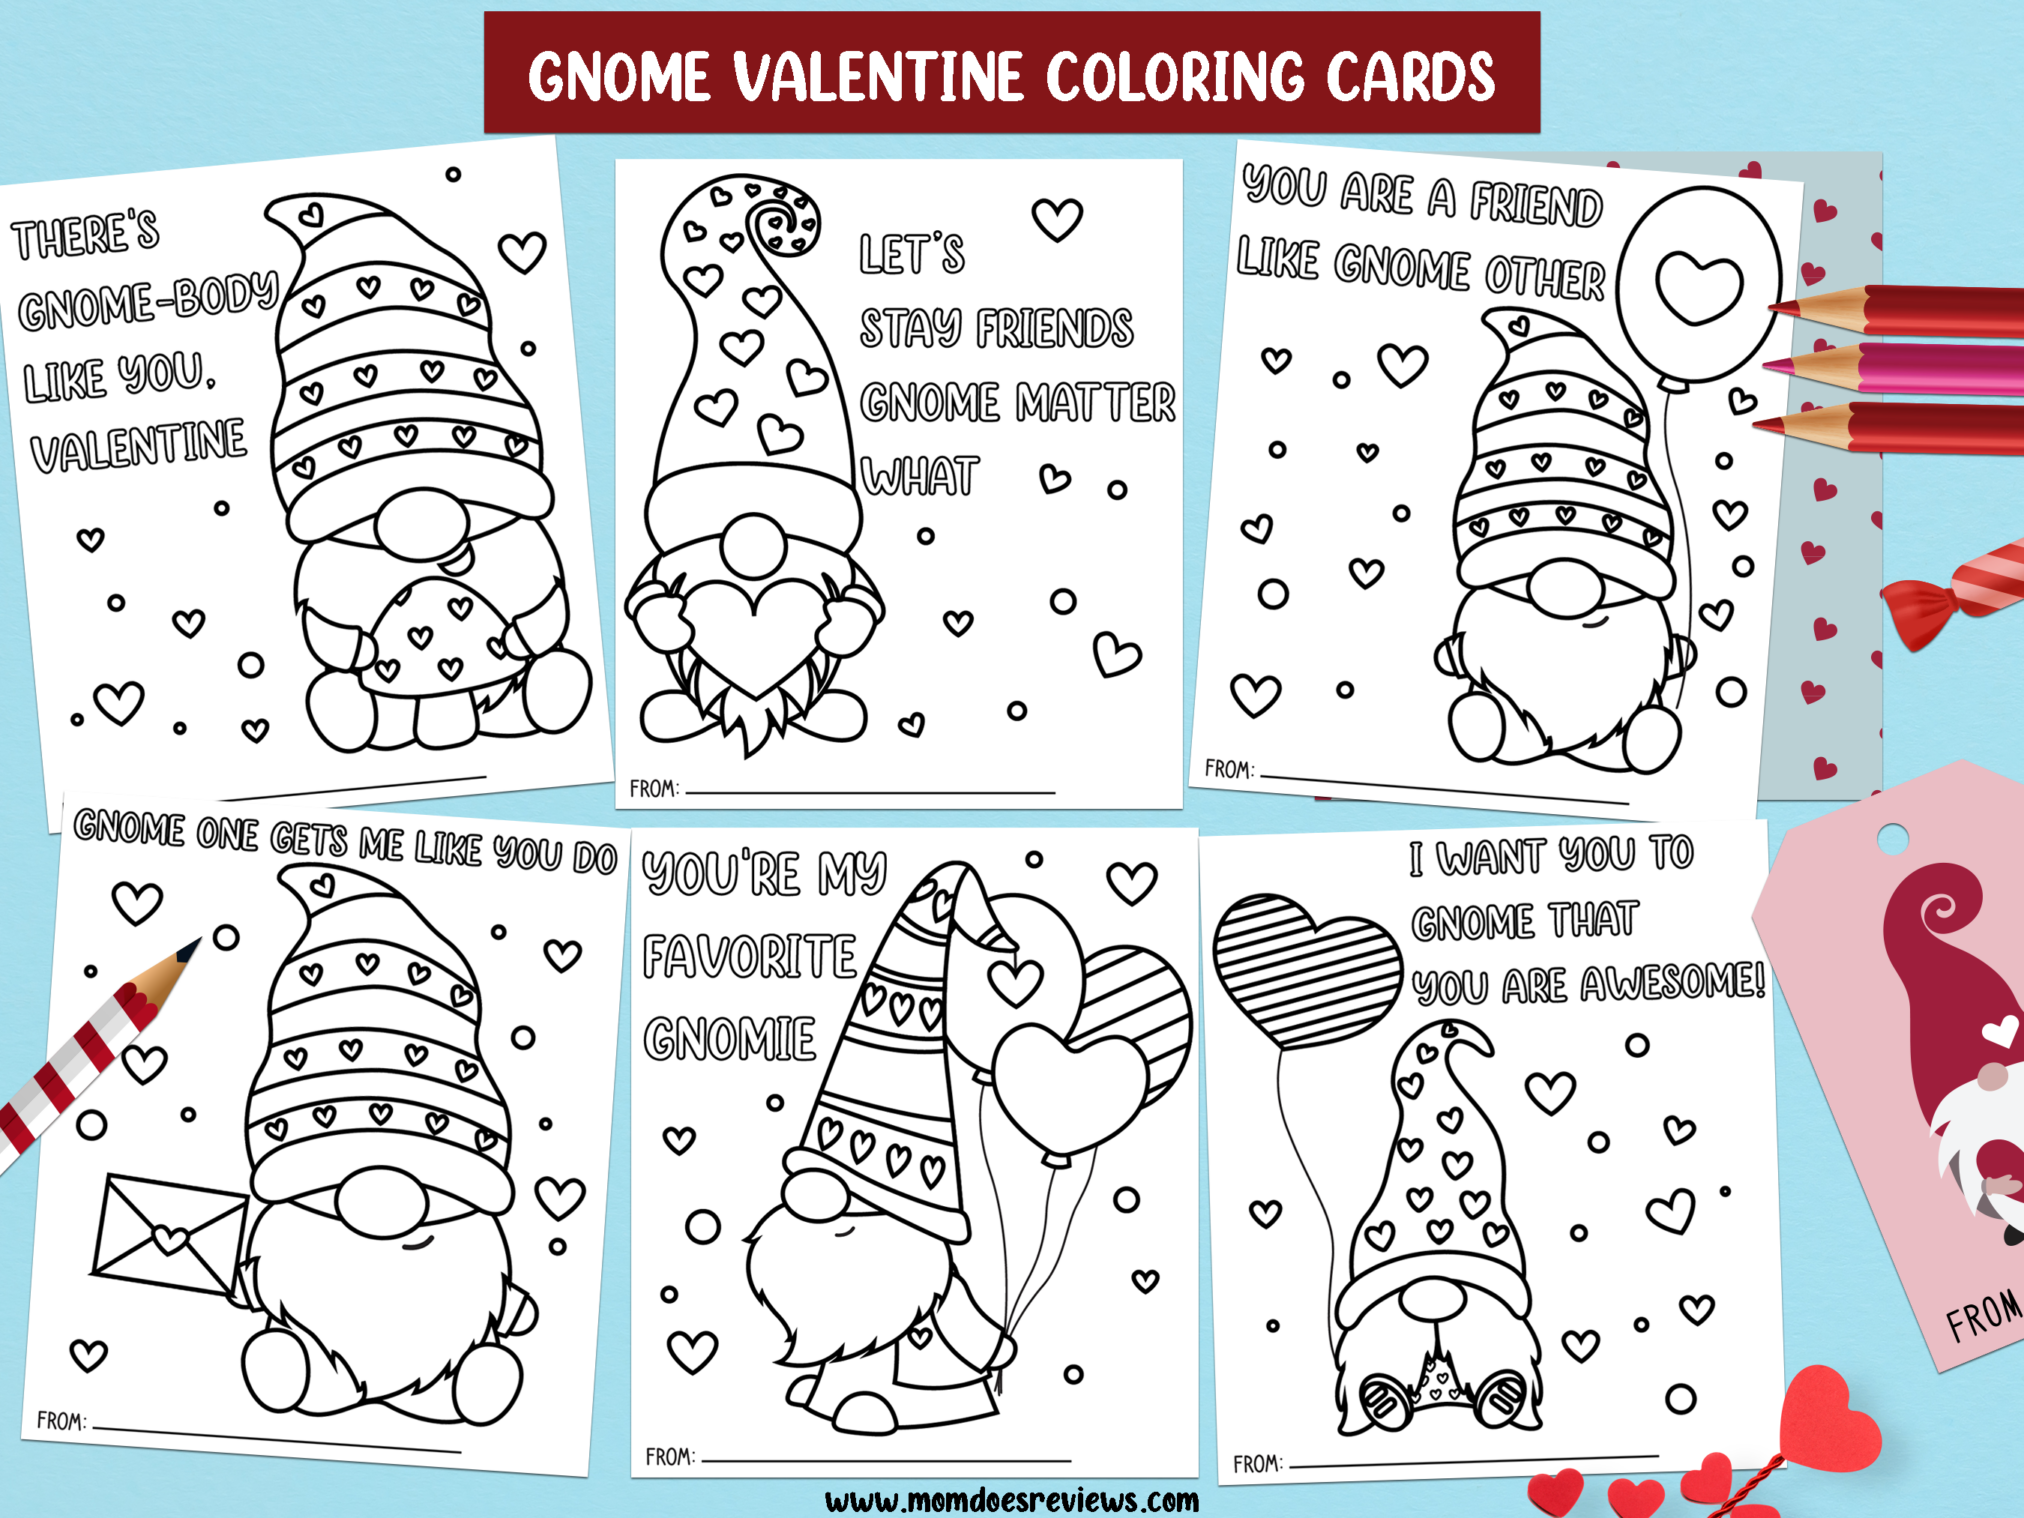 Gnome Valentine's Day Cards